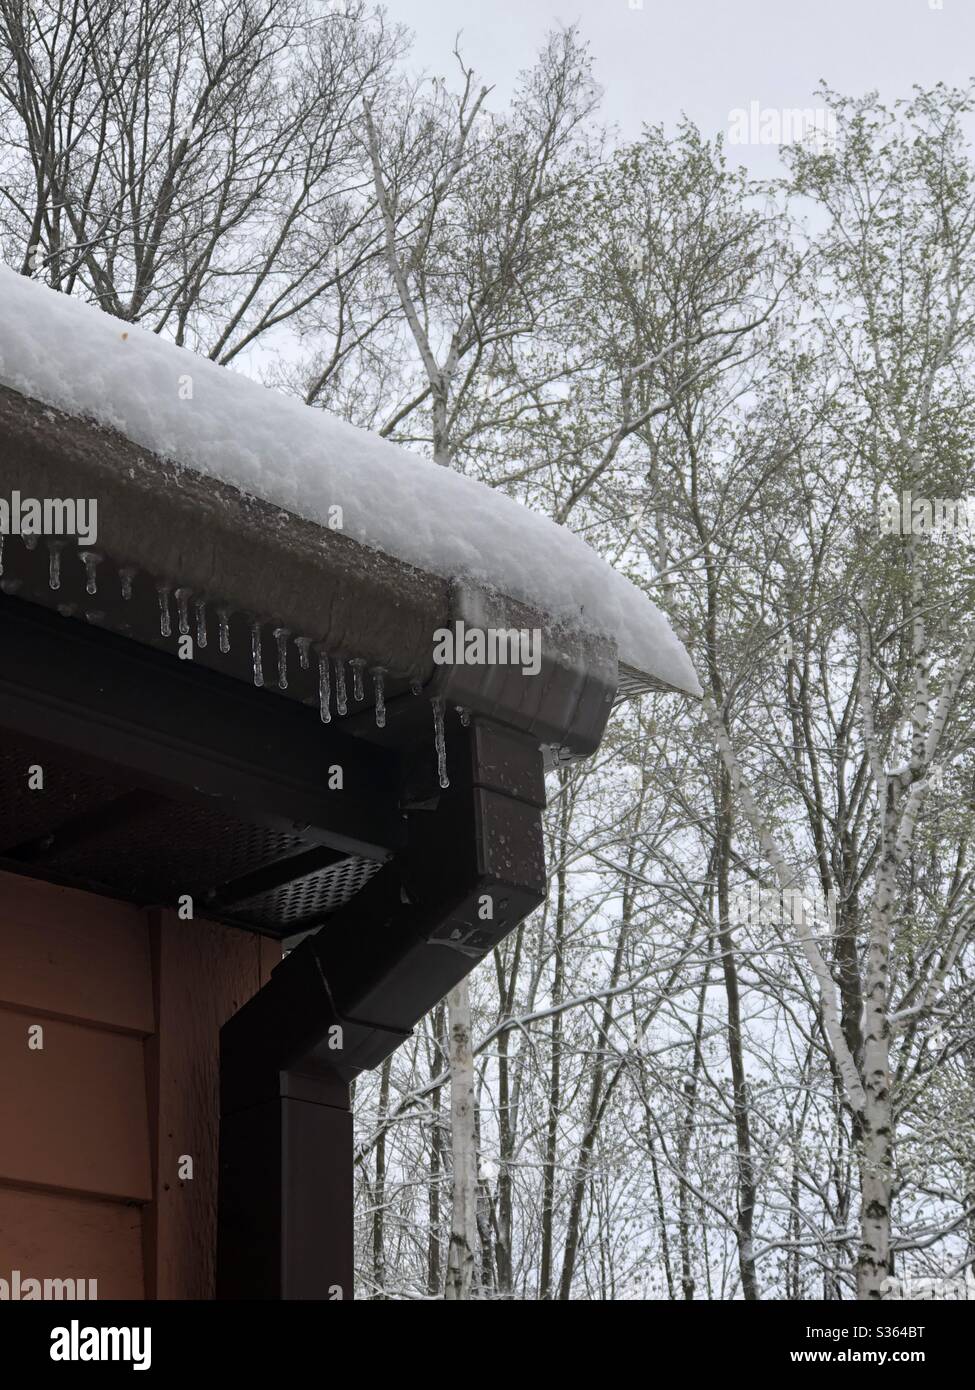 Unexpected late Spring snowfall and wintry weatheron May 9th, 2020 in Bennington, Vermont. Small icicles on the edge of a roof with snow covered trees in the background, Stock Photo